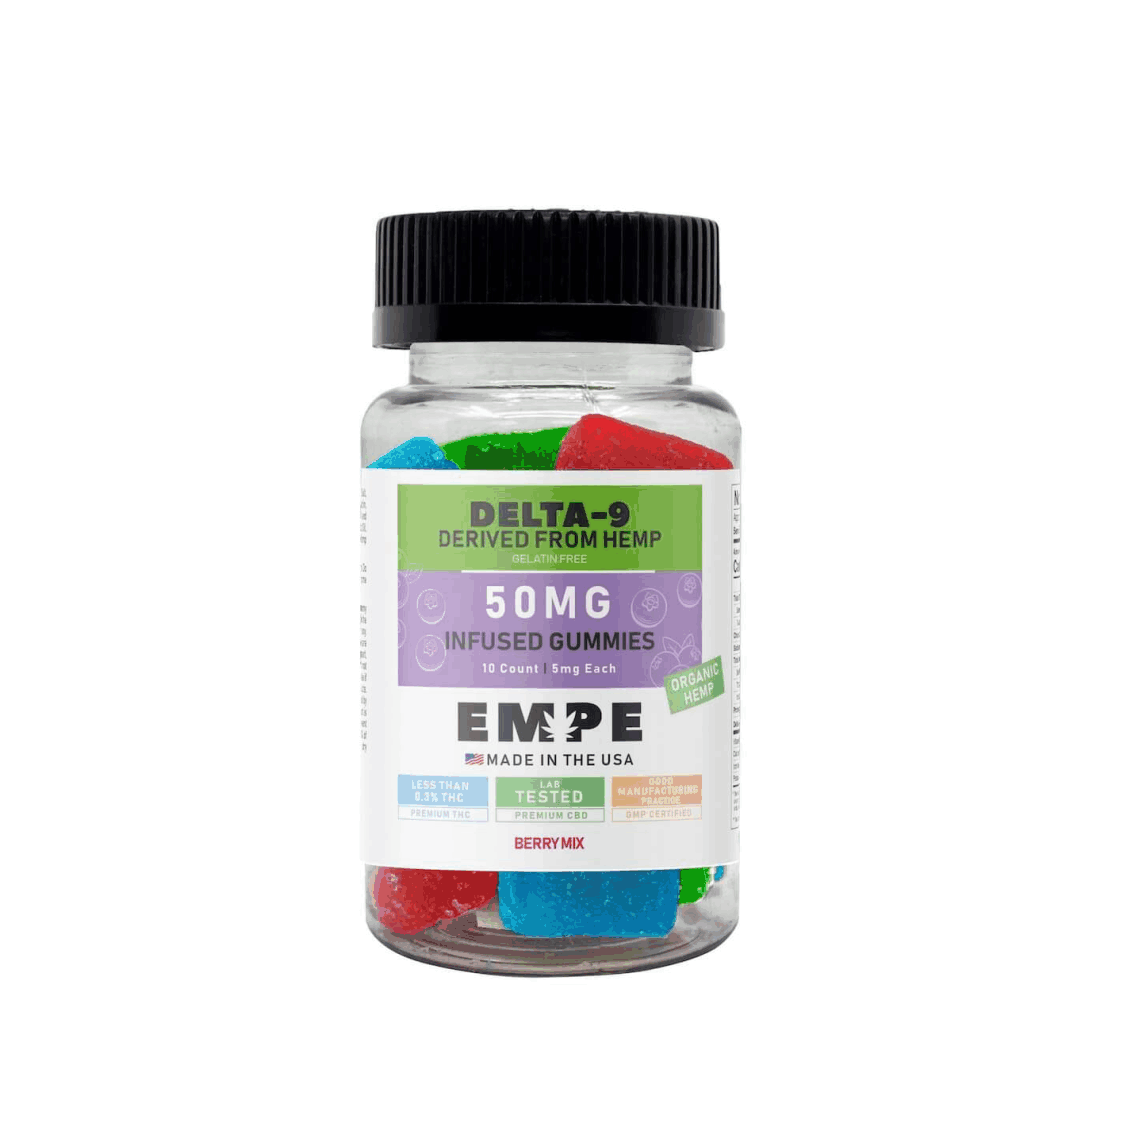 Delta-9 Gummies By Empe-USA-Comprehensive Review Unveiling the Finest Delta-9 Gummies